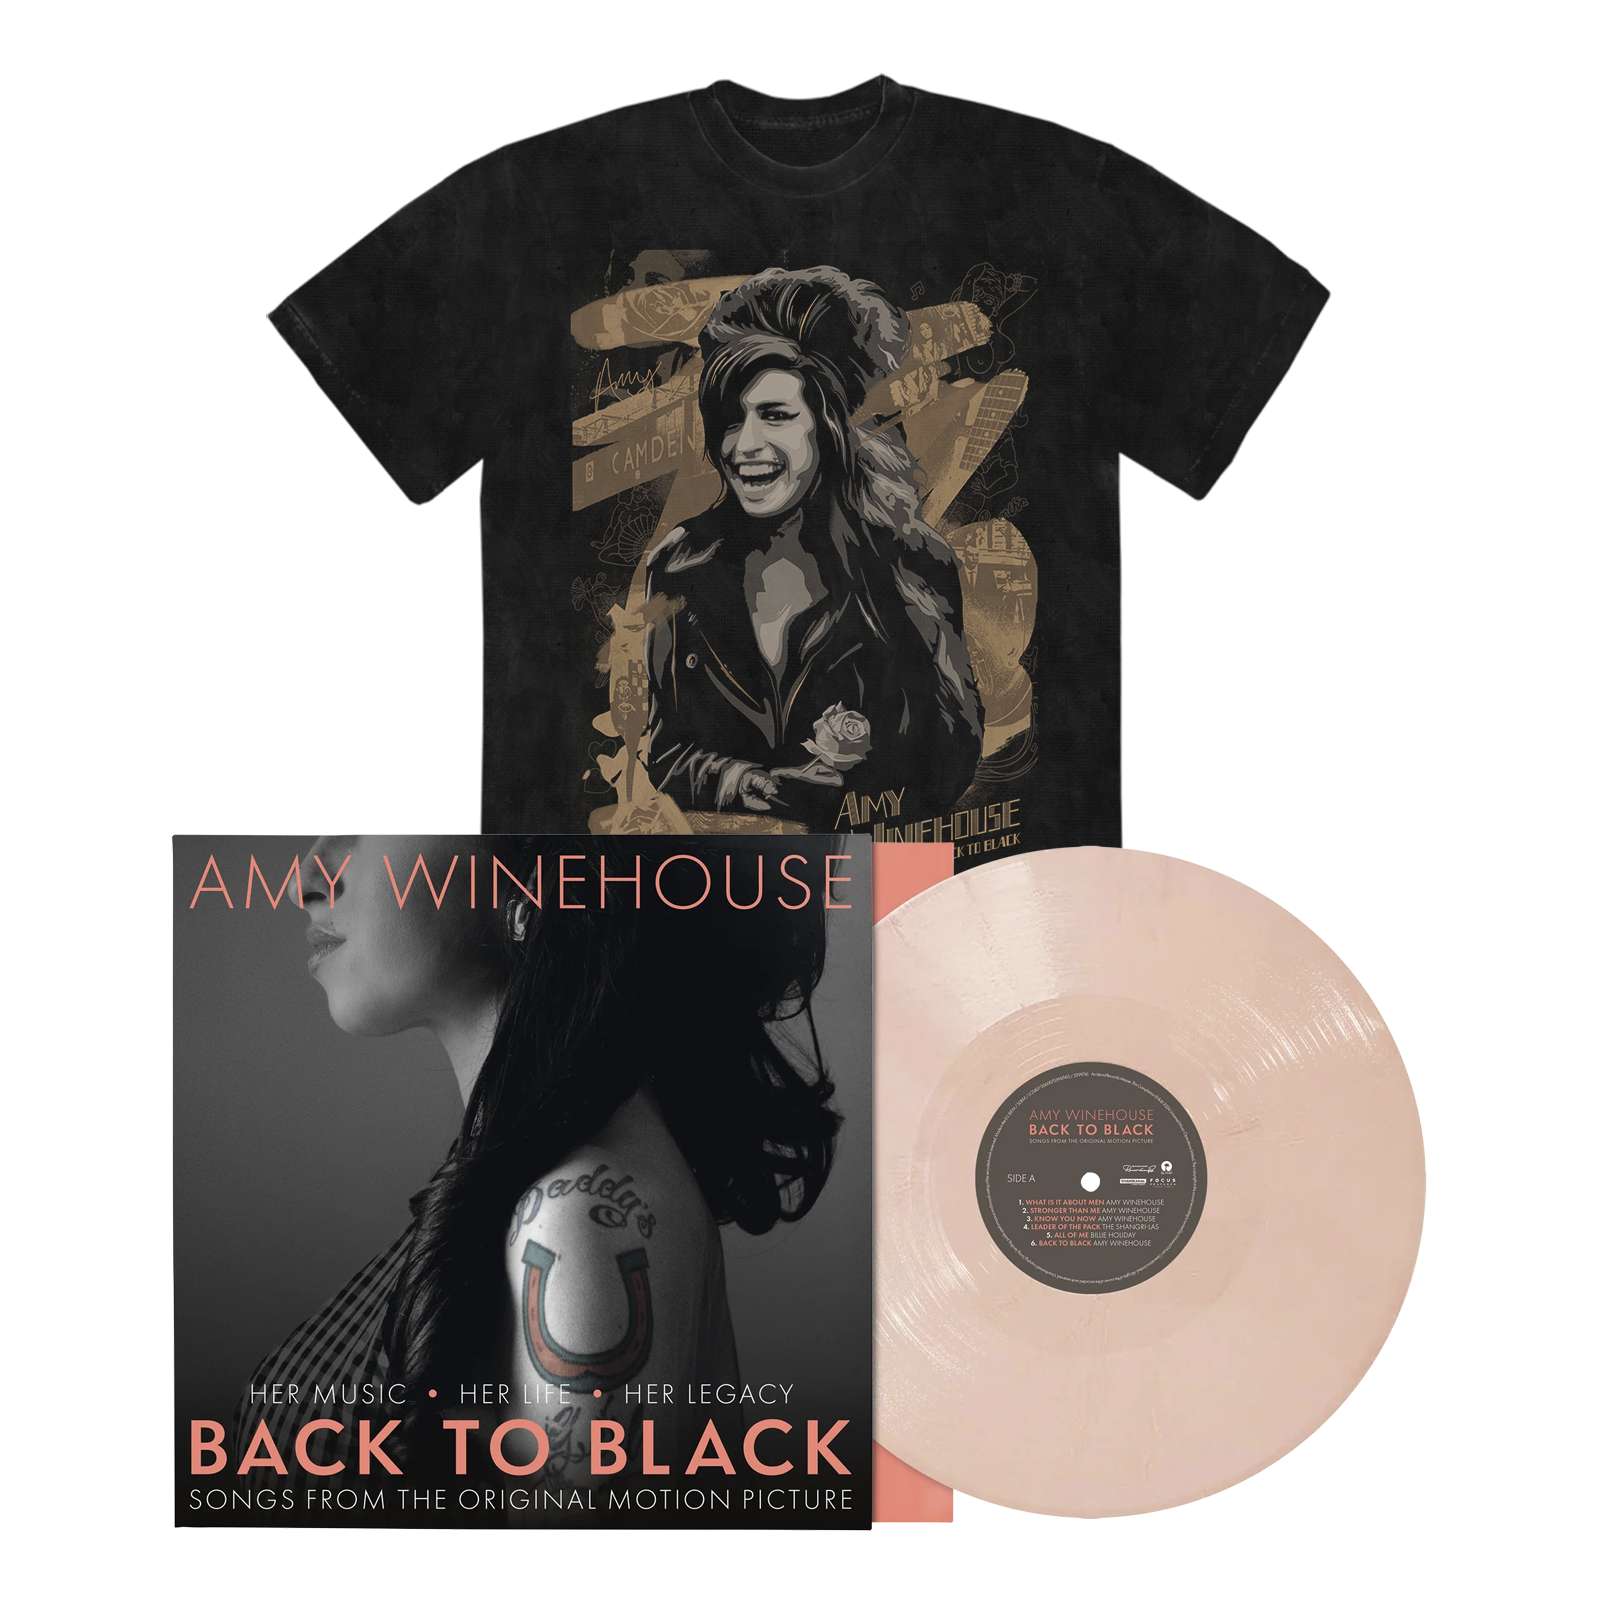 Back To Black - Songs From The Original Motion Picture: Exclusive Peach Vinyl LP + Back To Black Portrait Washed T-Shirt